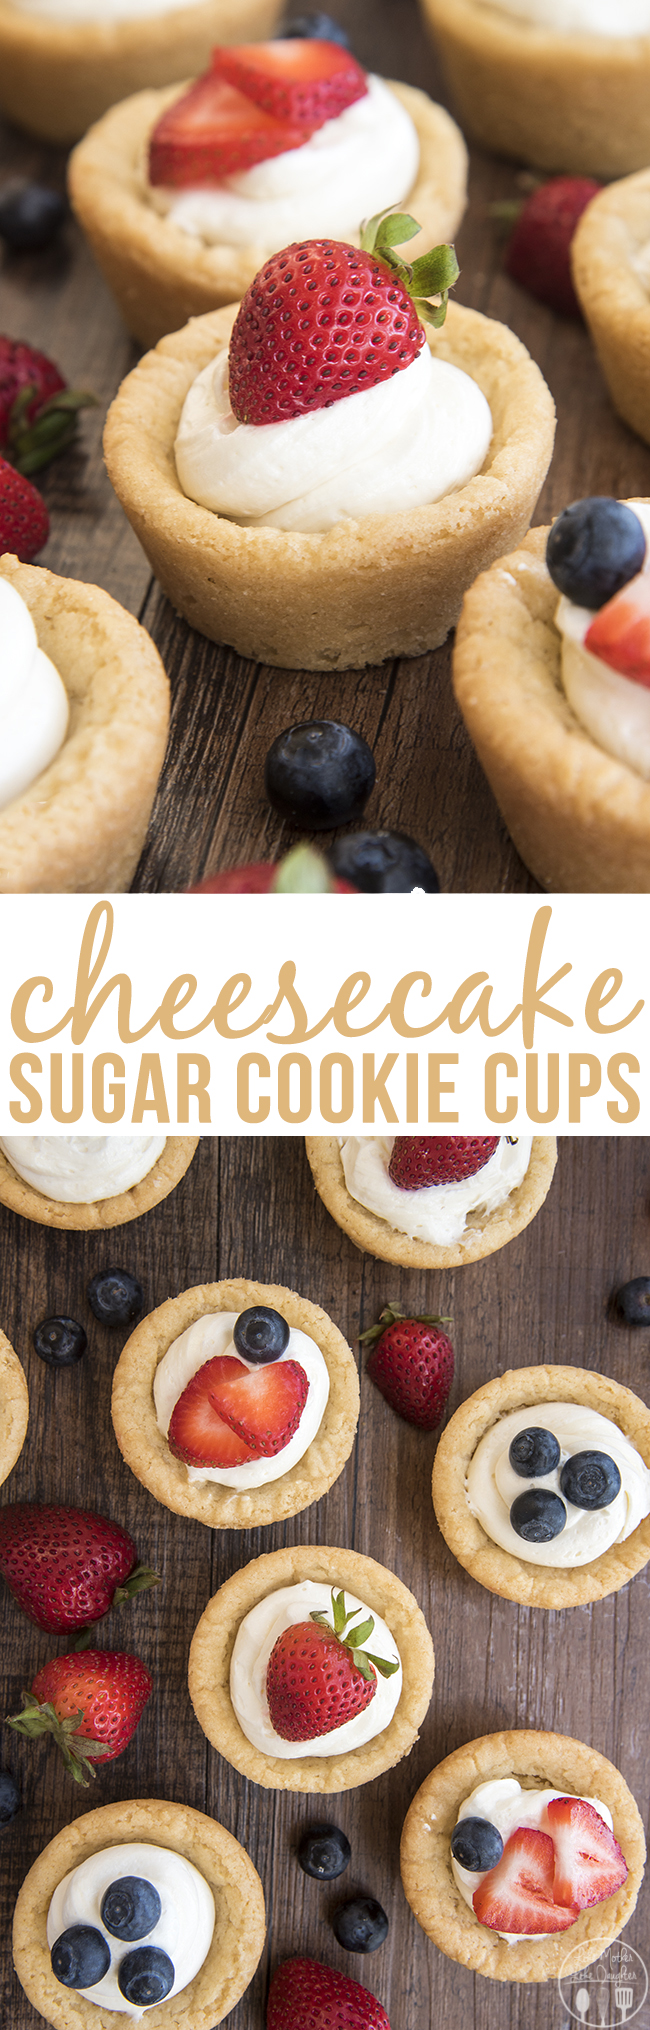 Title card for cheesecake sugar cookie cups.